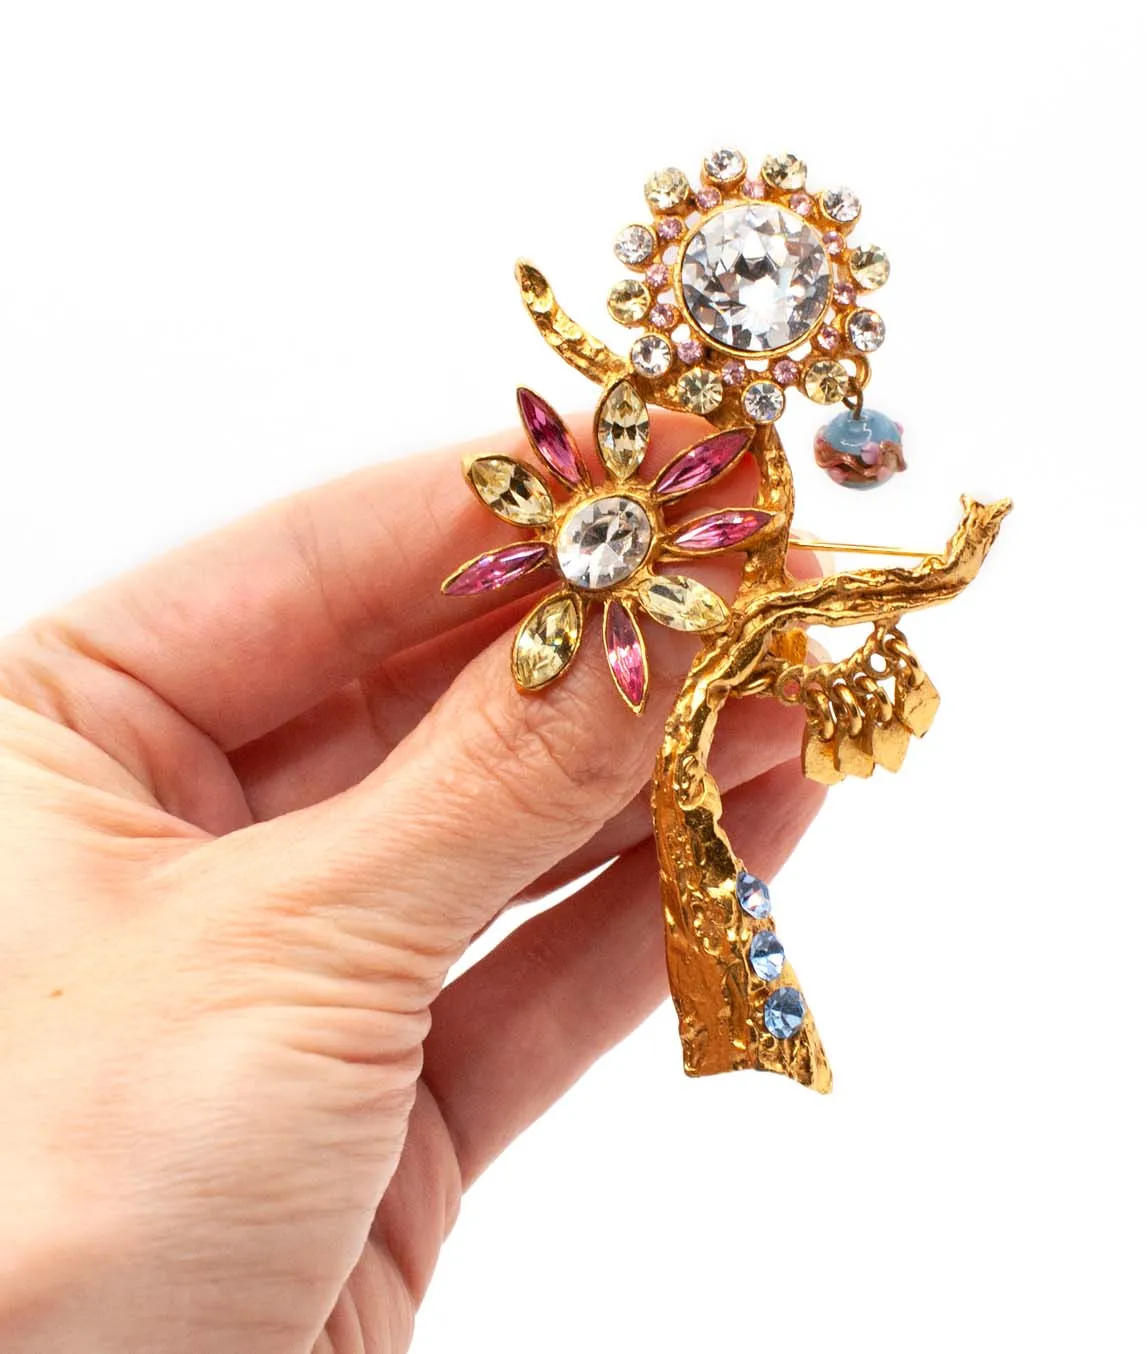 Large Christian Lacroix brooch held in a hand